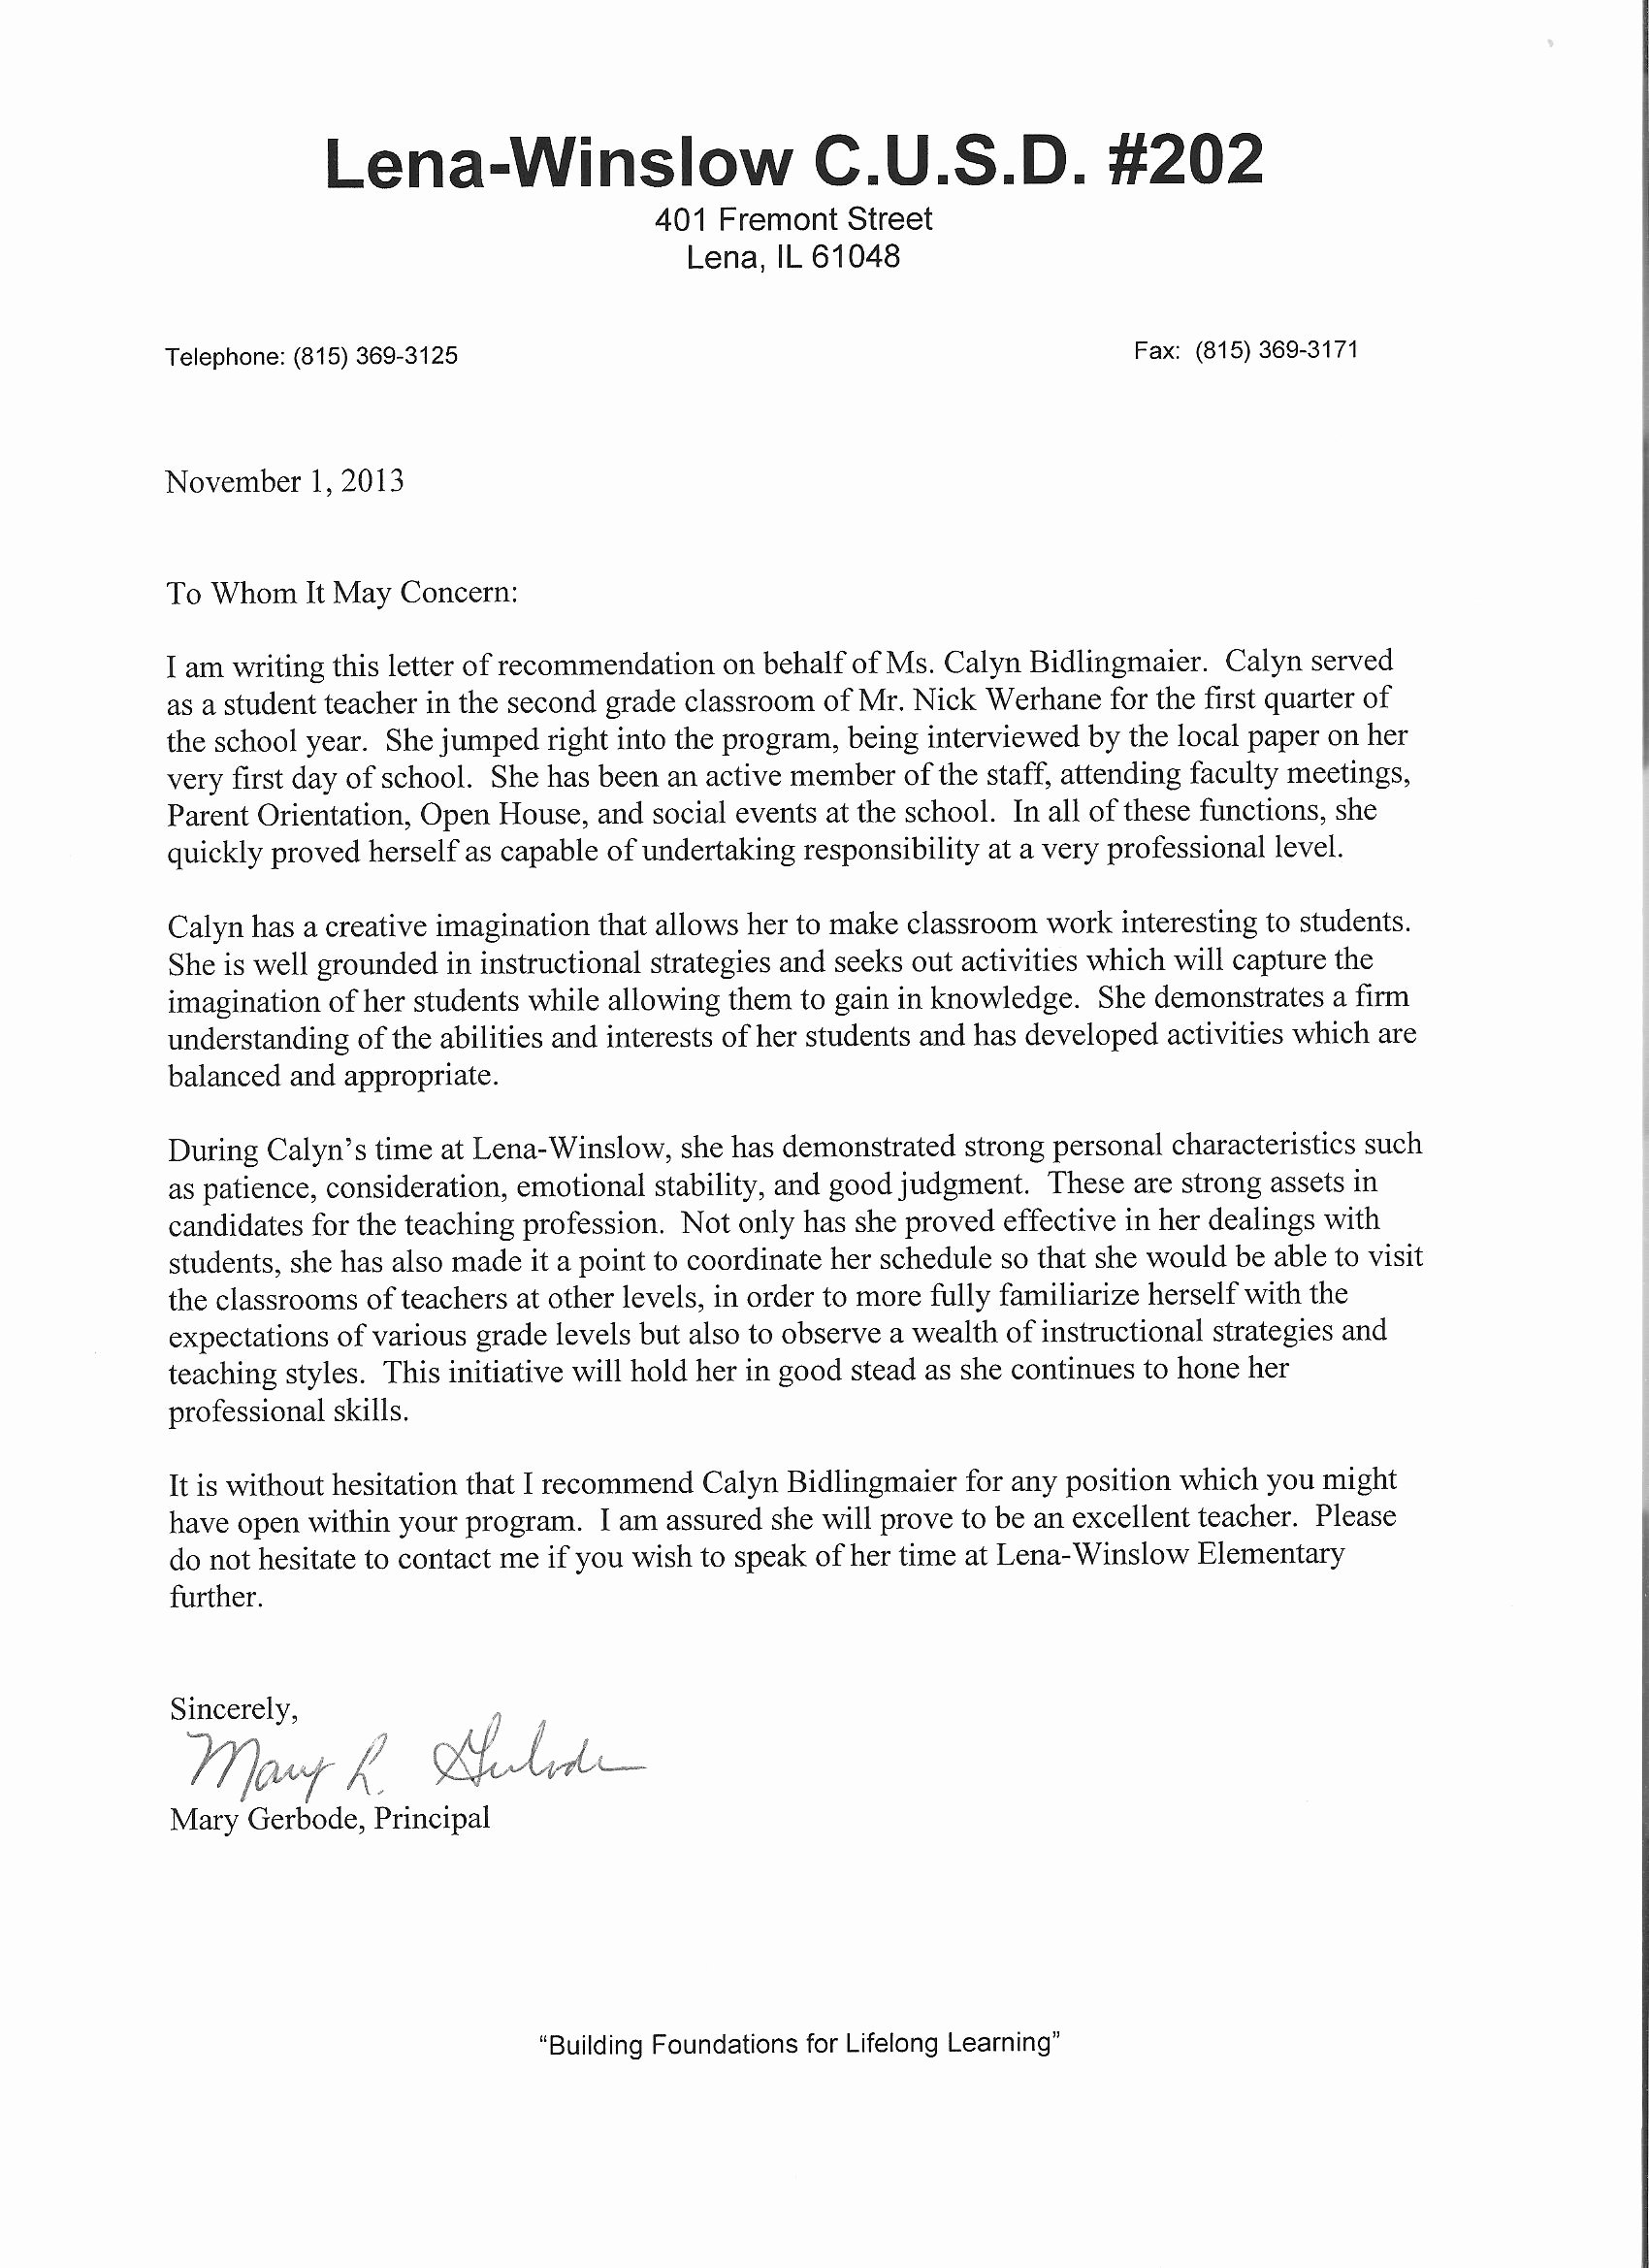 Letter Of Recommendation for Principals Luxury Licensure Elements Calyn Bidlingmaier S Teaching Portfolio